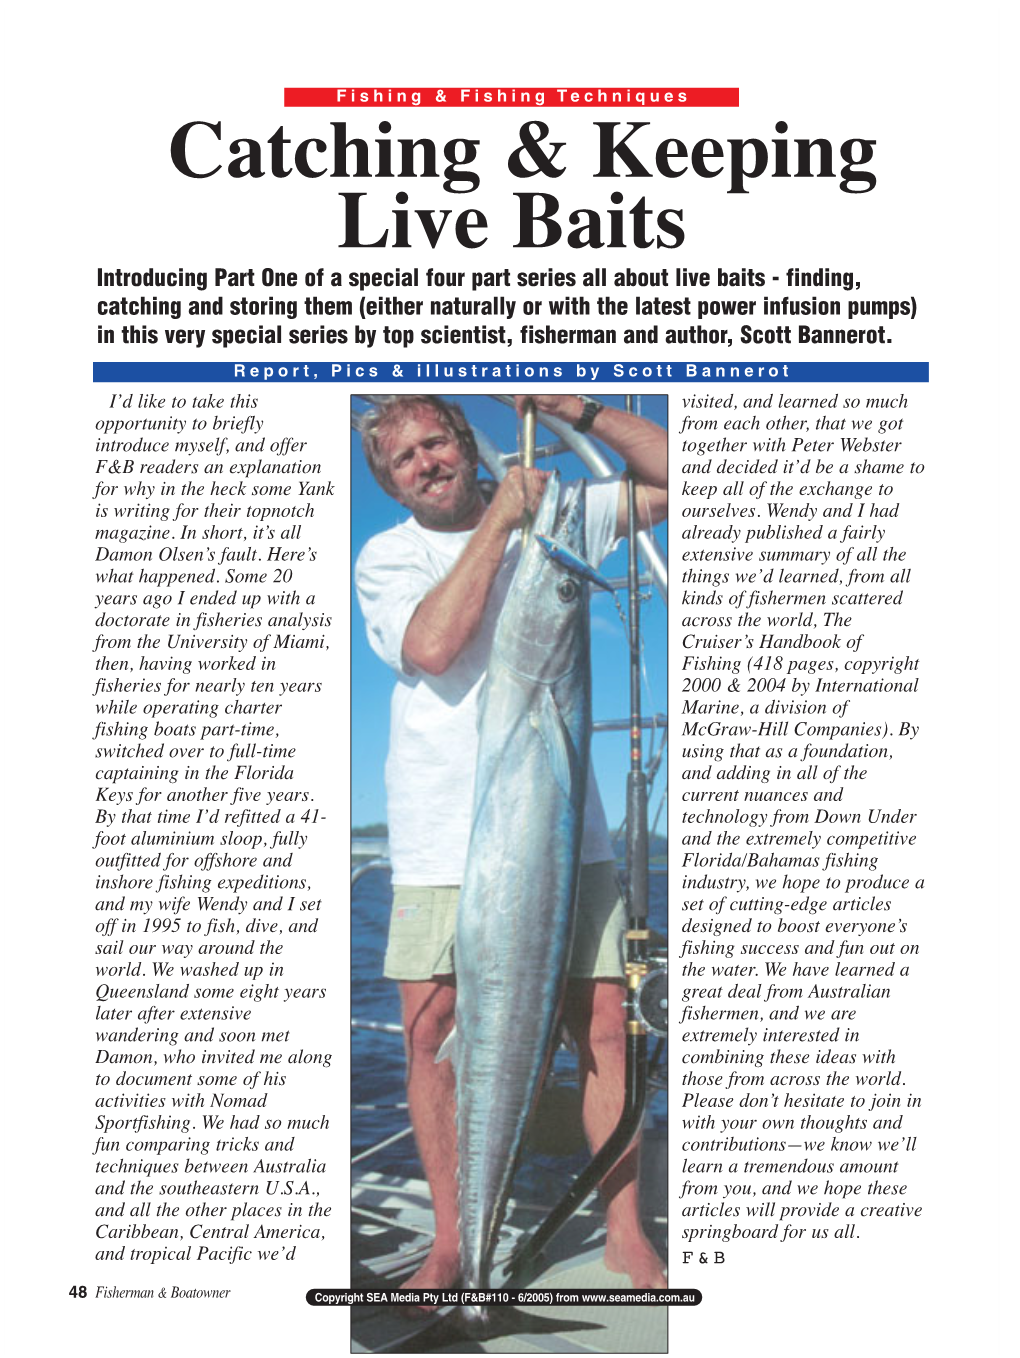 Catching & Keeping Live Baits